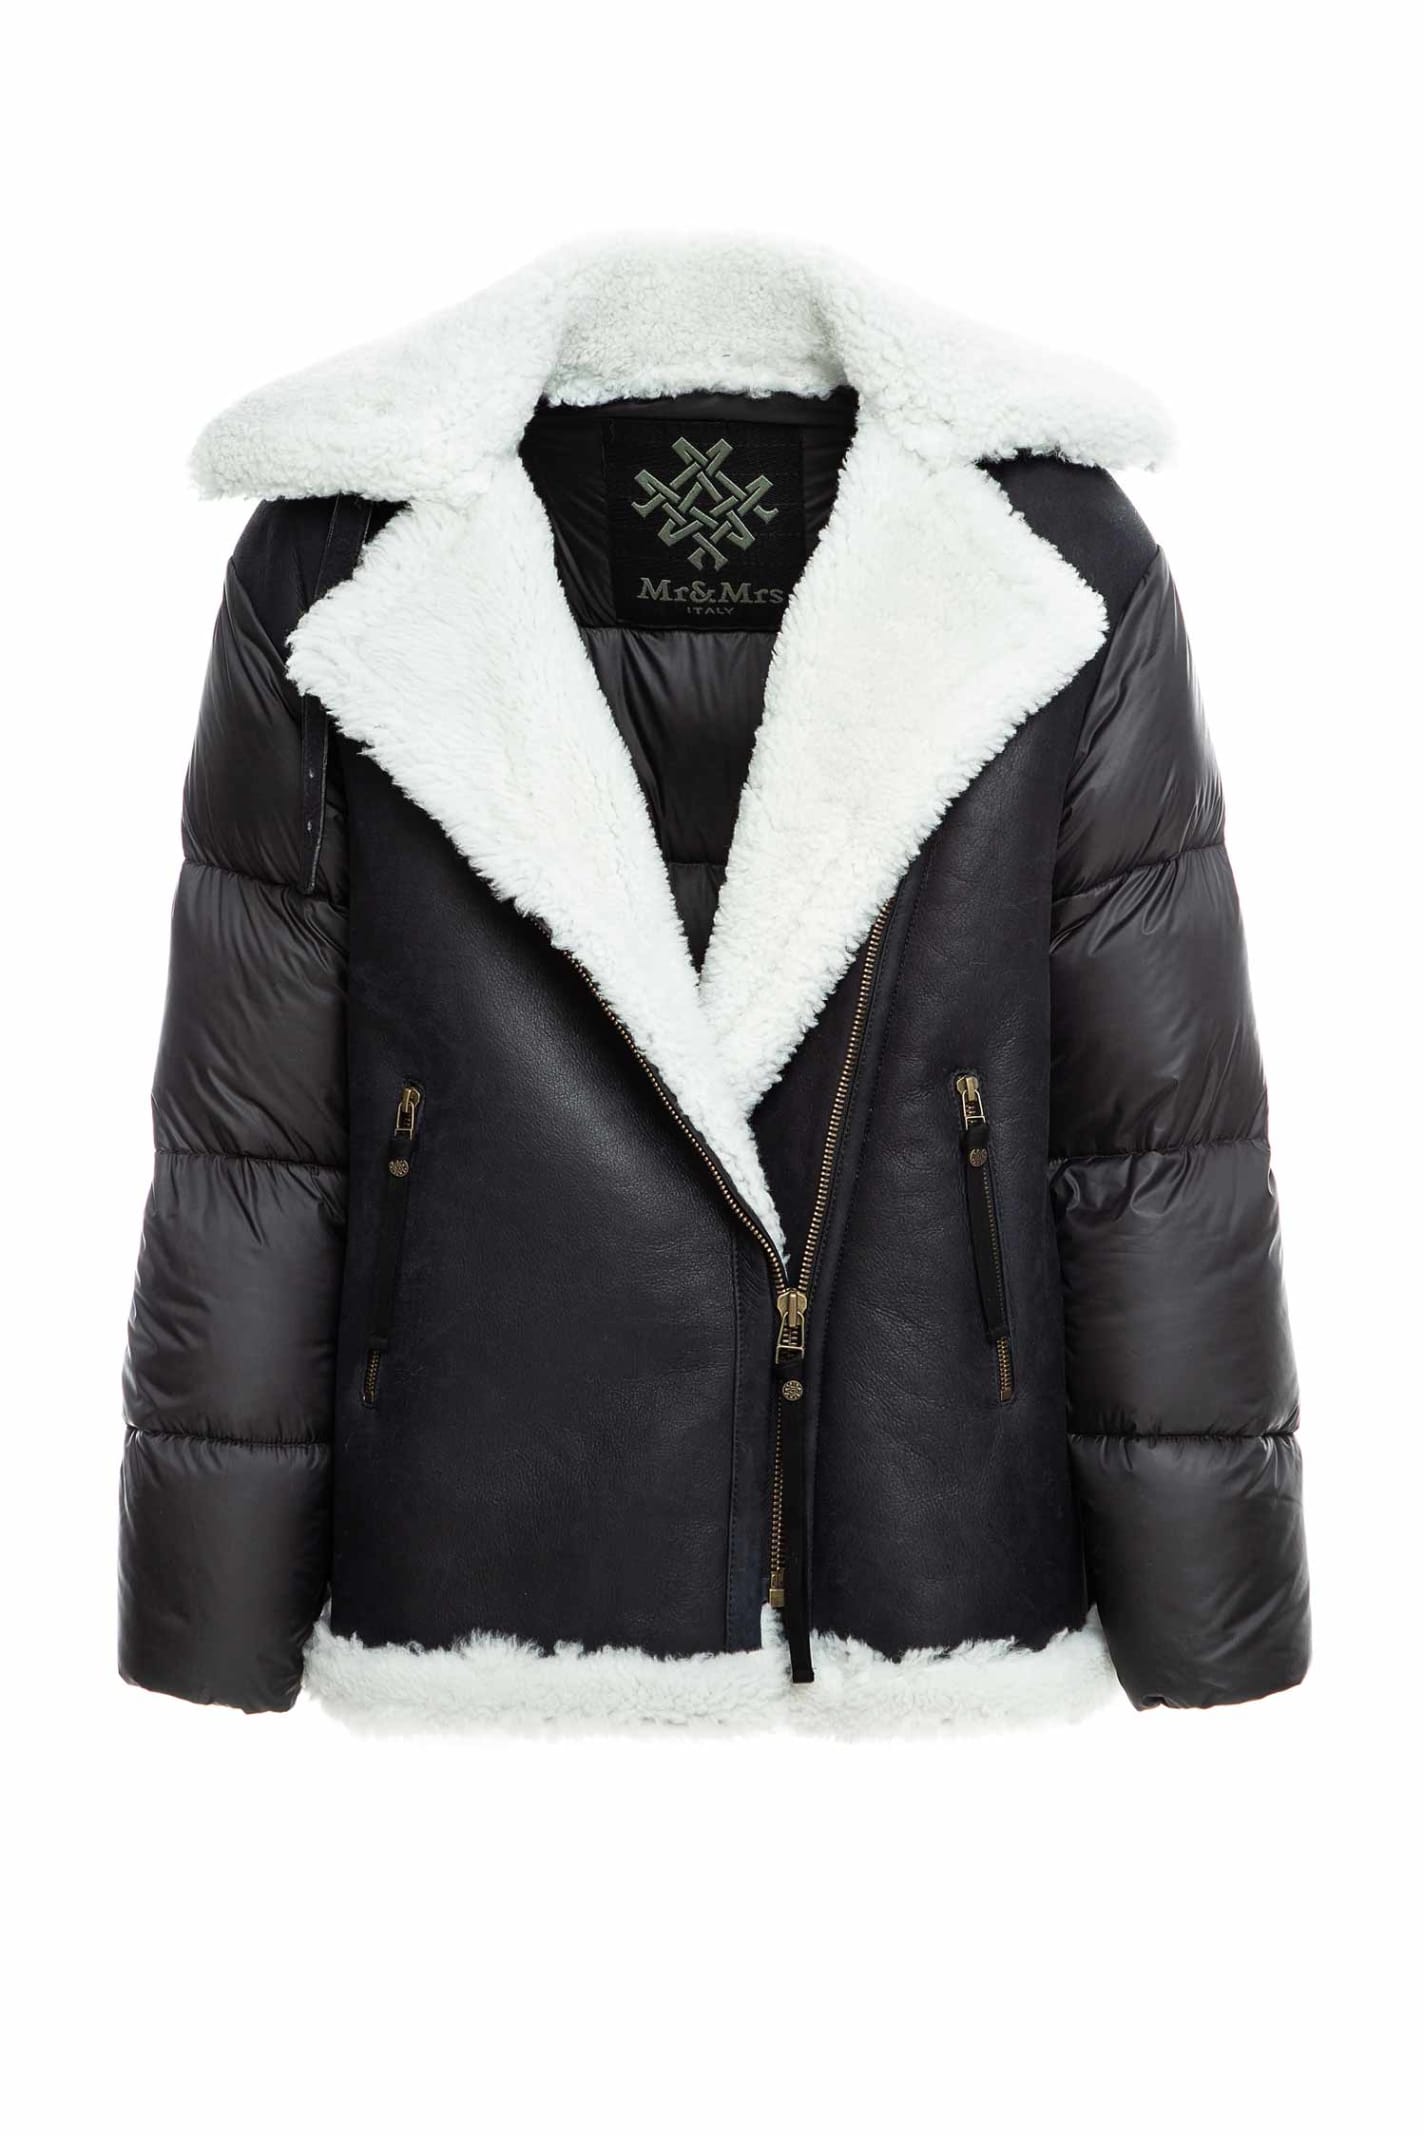 Mr & Mrs Italy Shearling Jacket With Padded Details